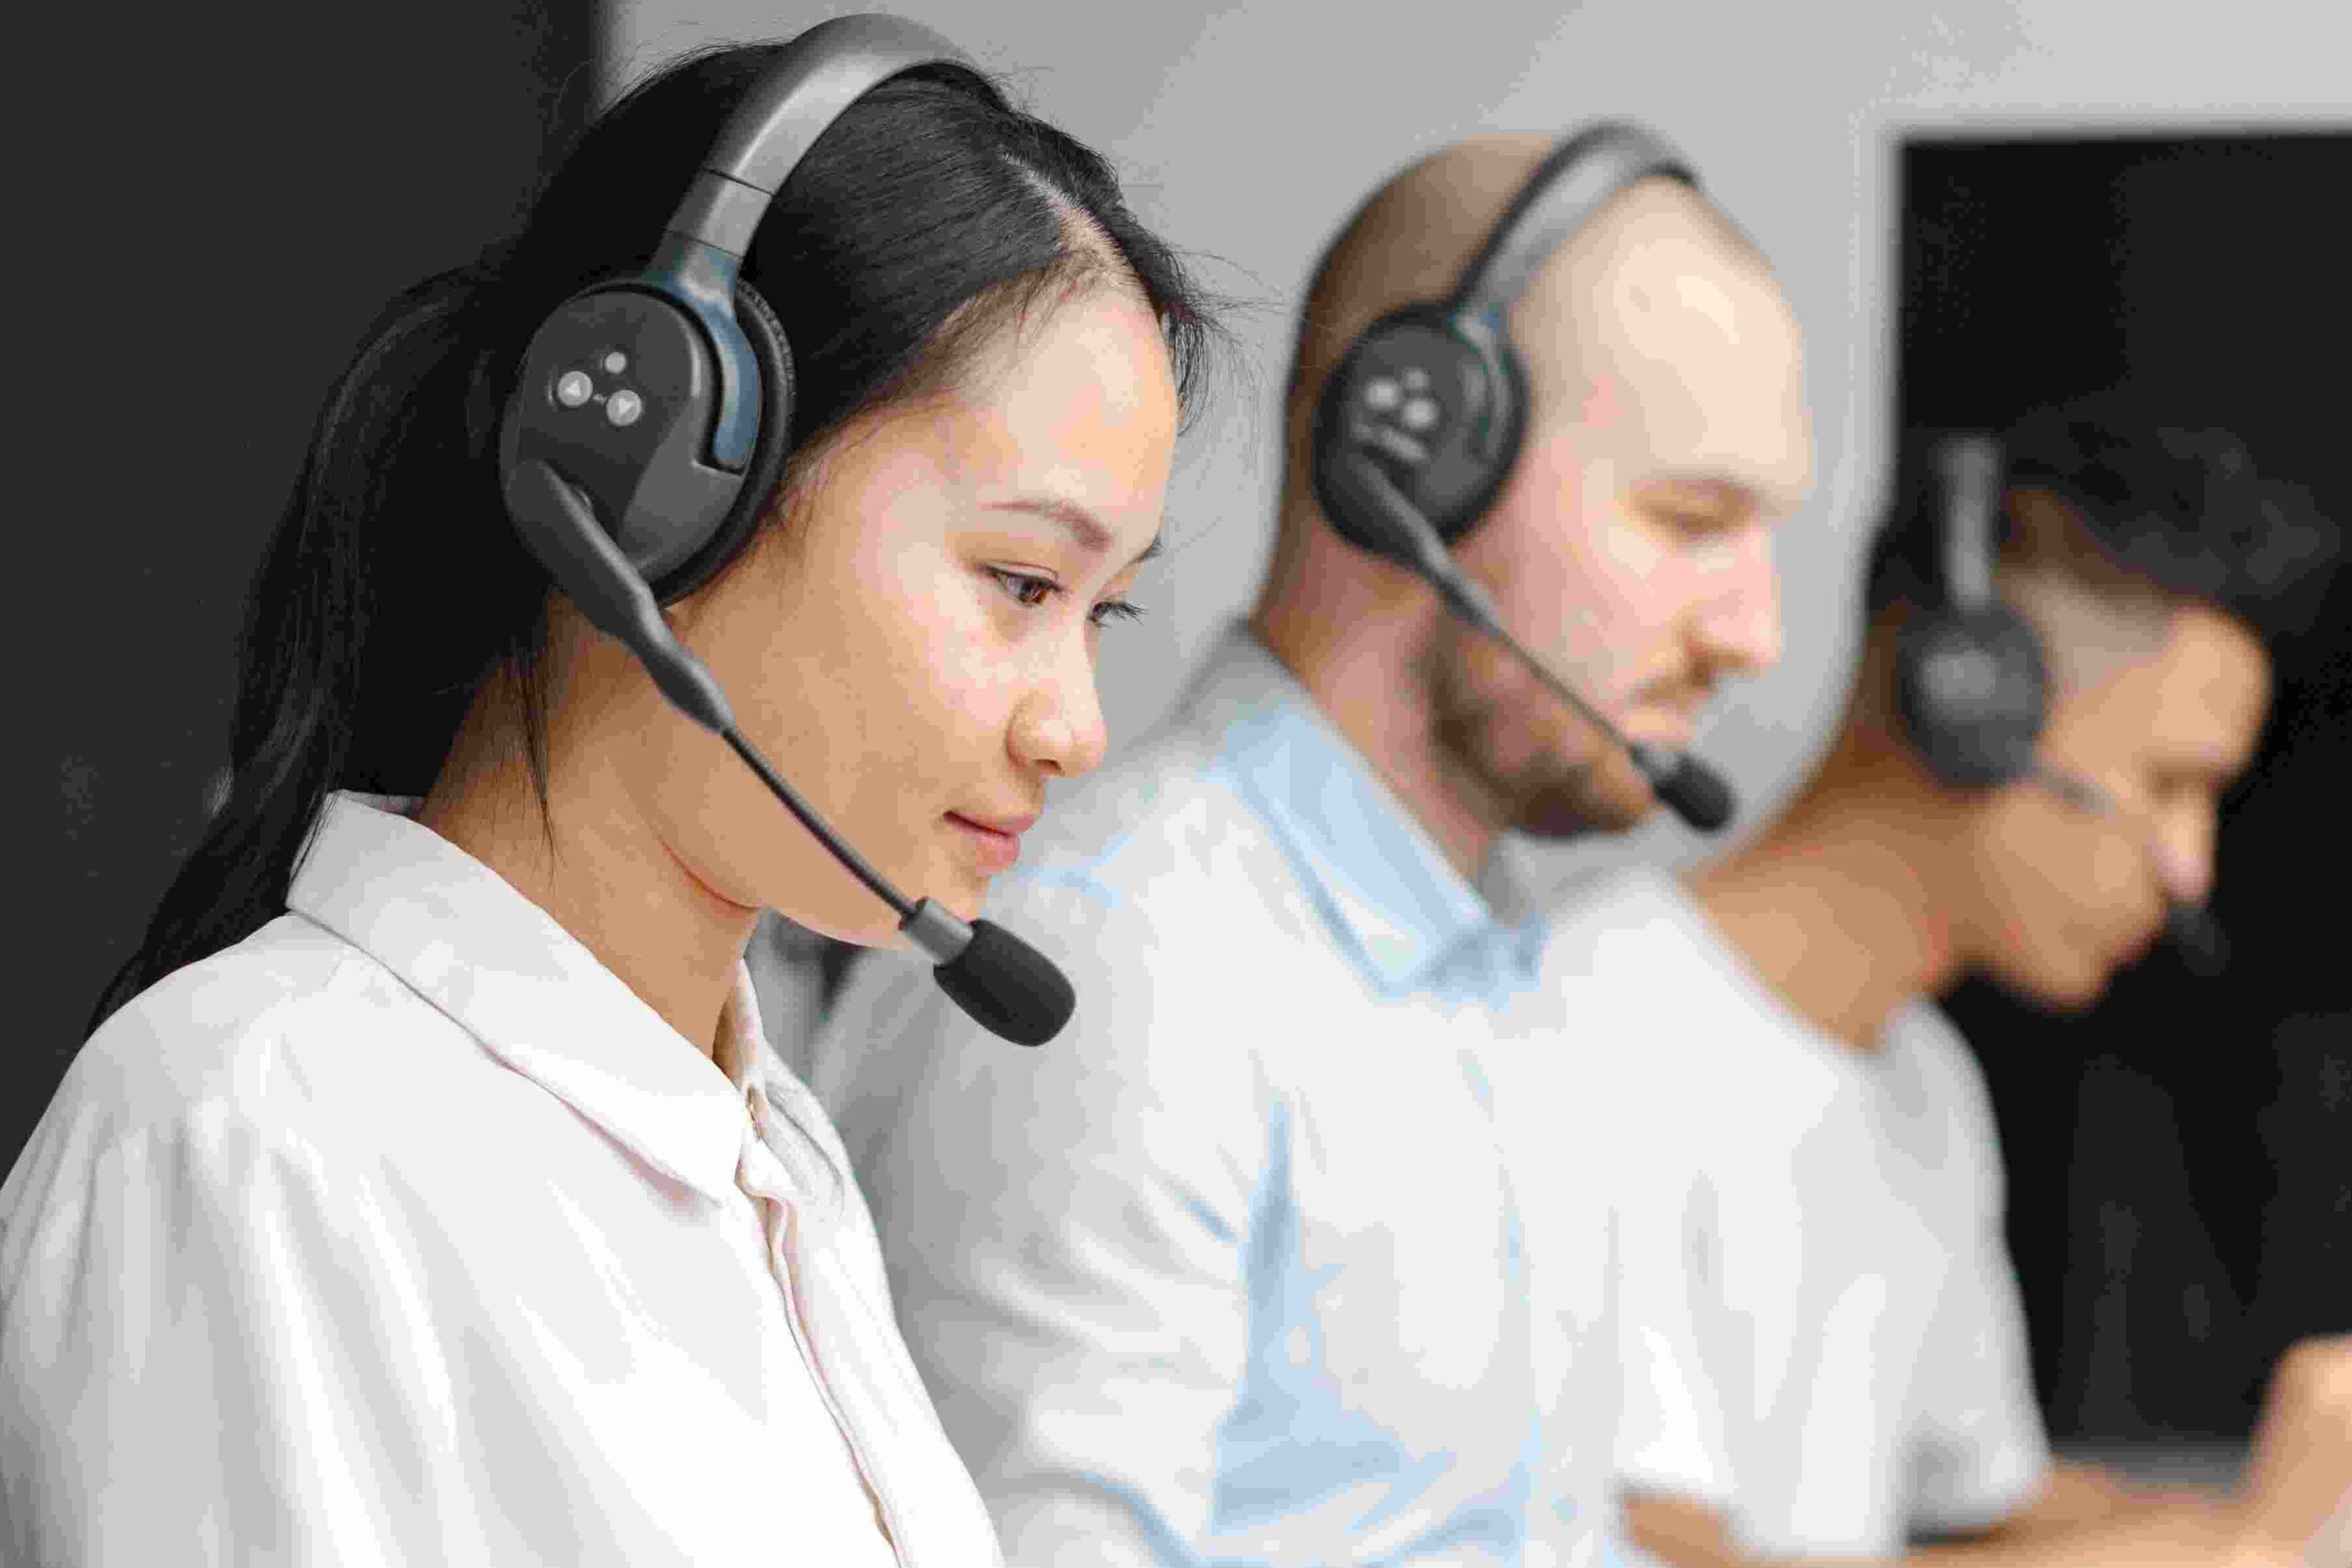 Customer Support
Customer Support Executive